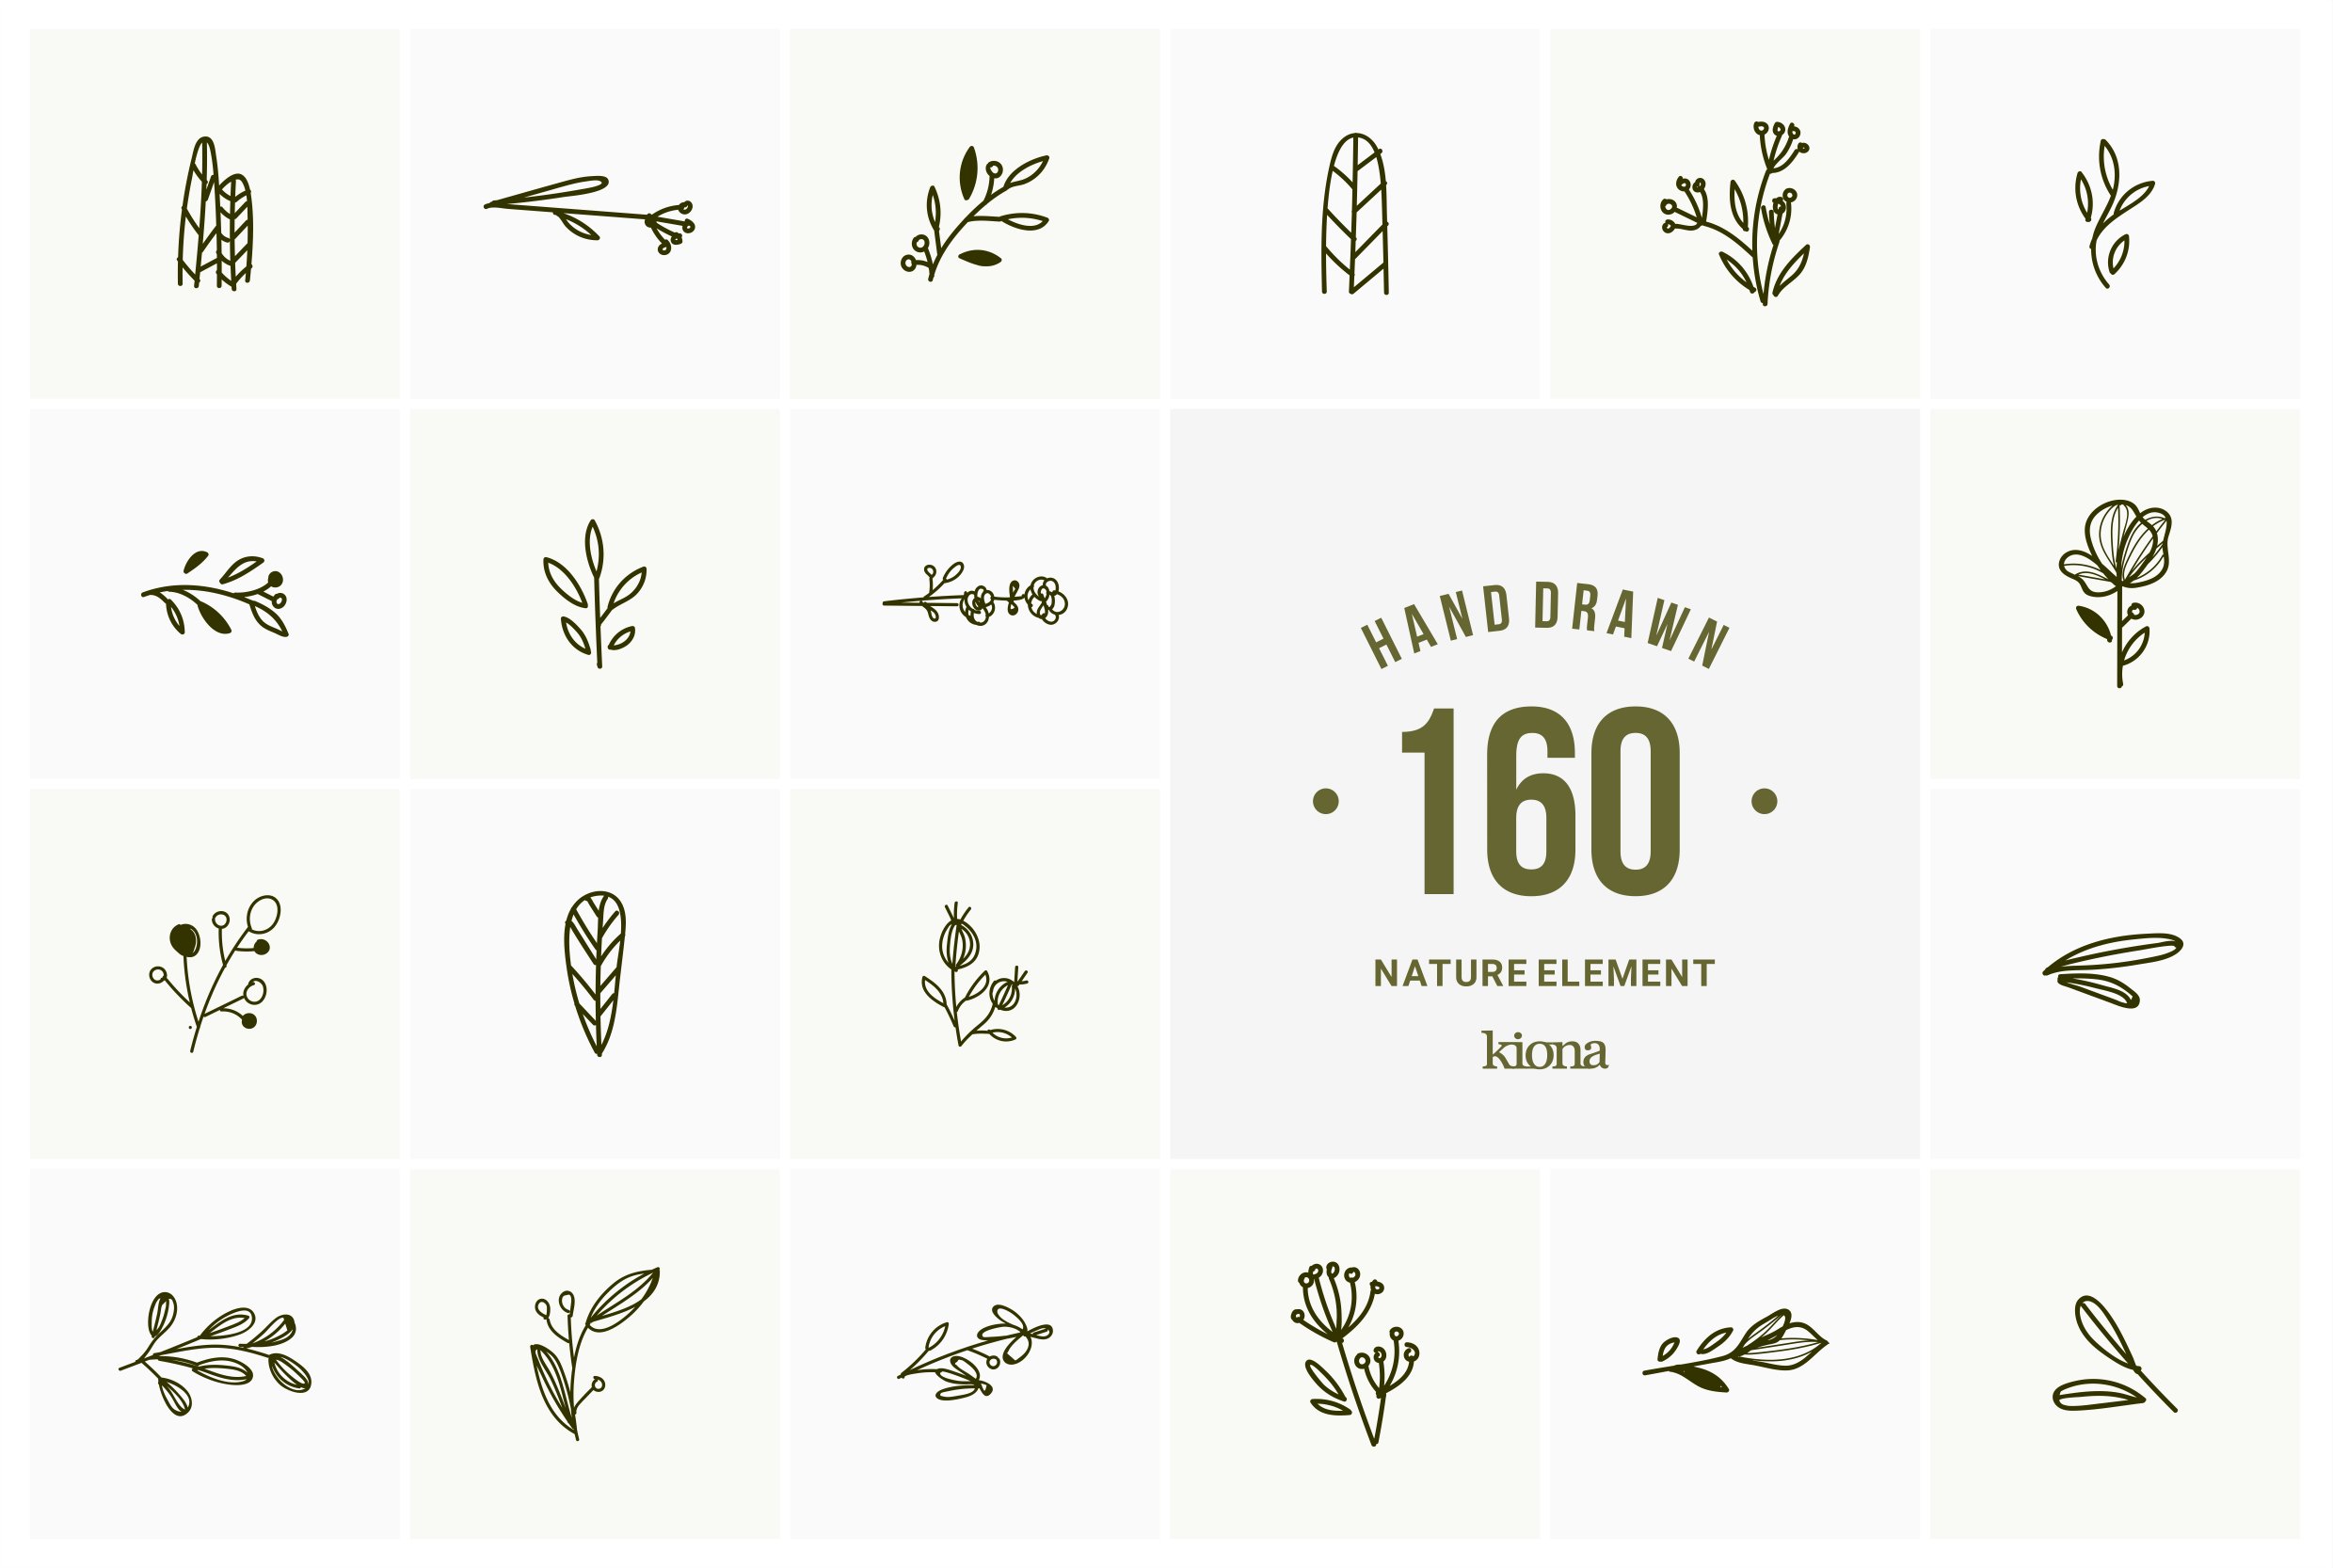 Collection of hand drawn nature elements.